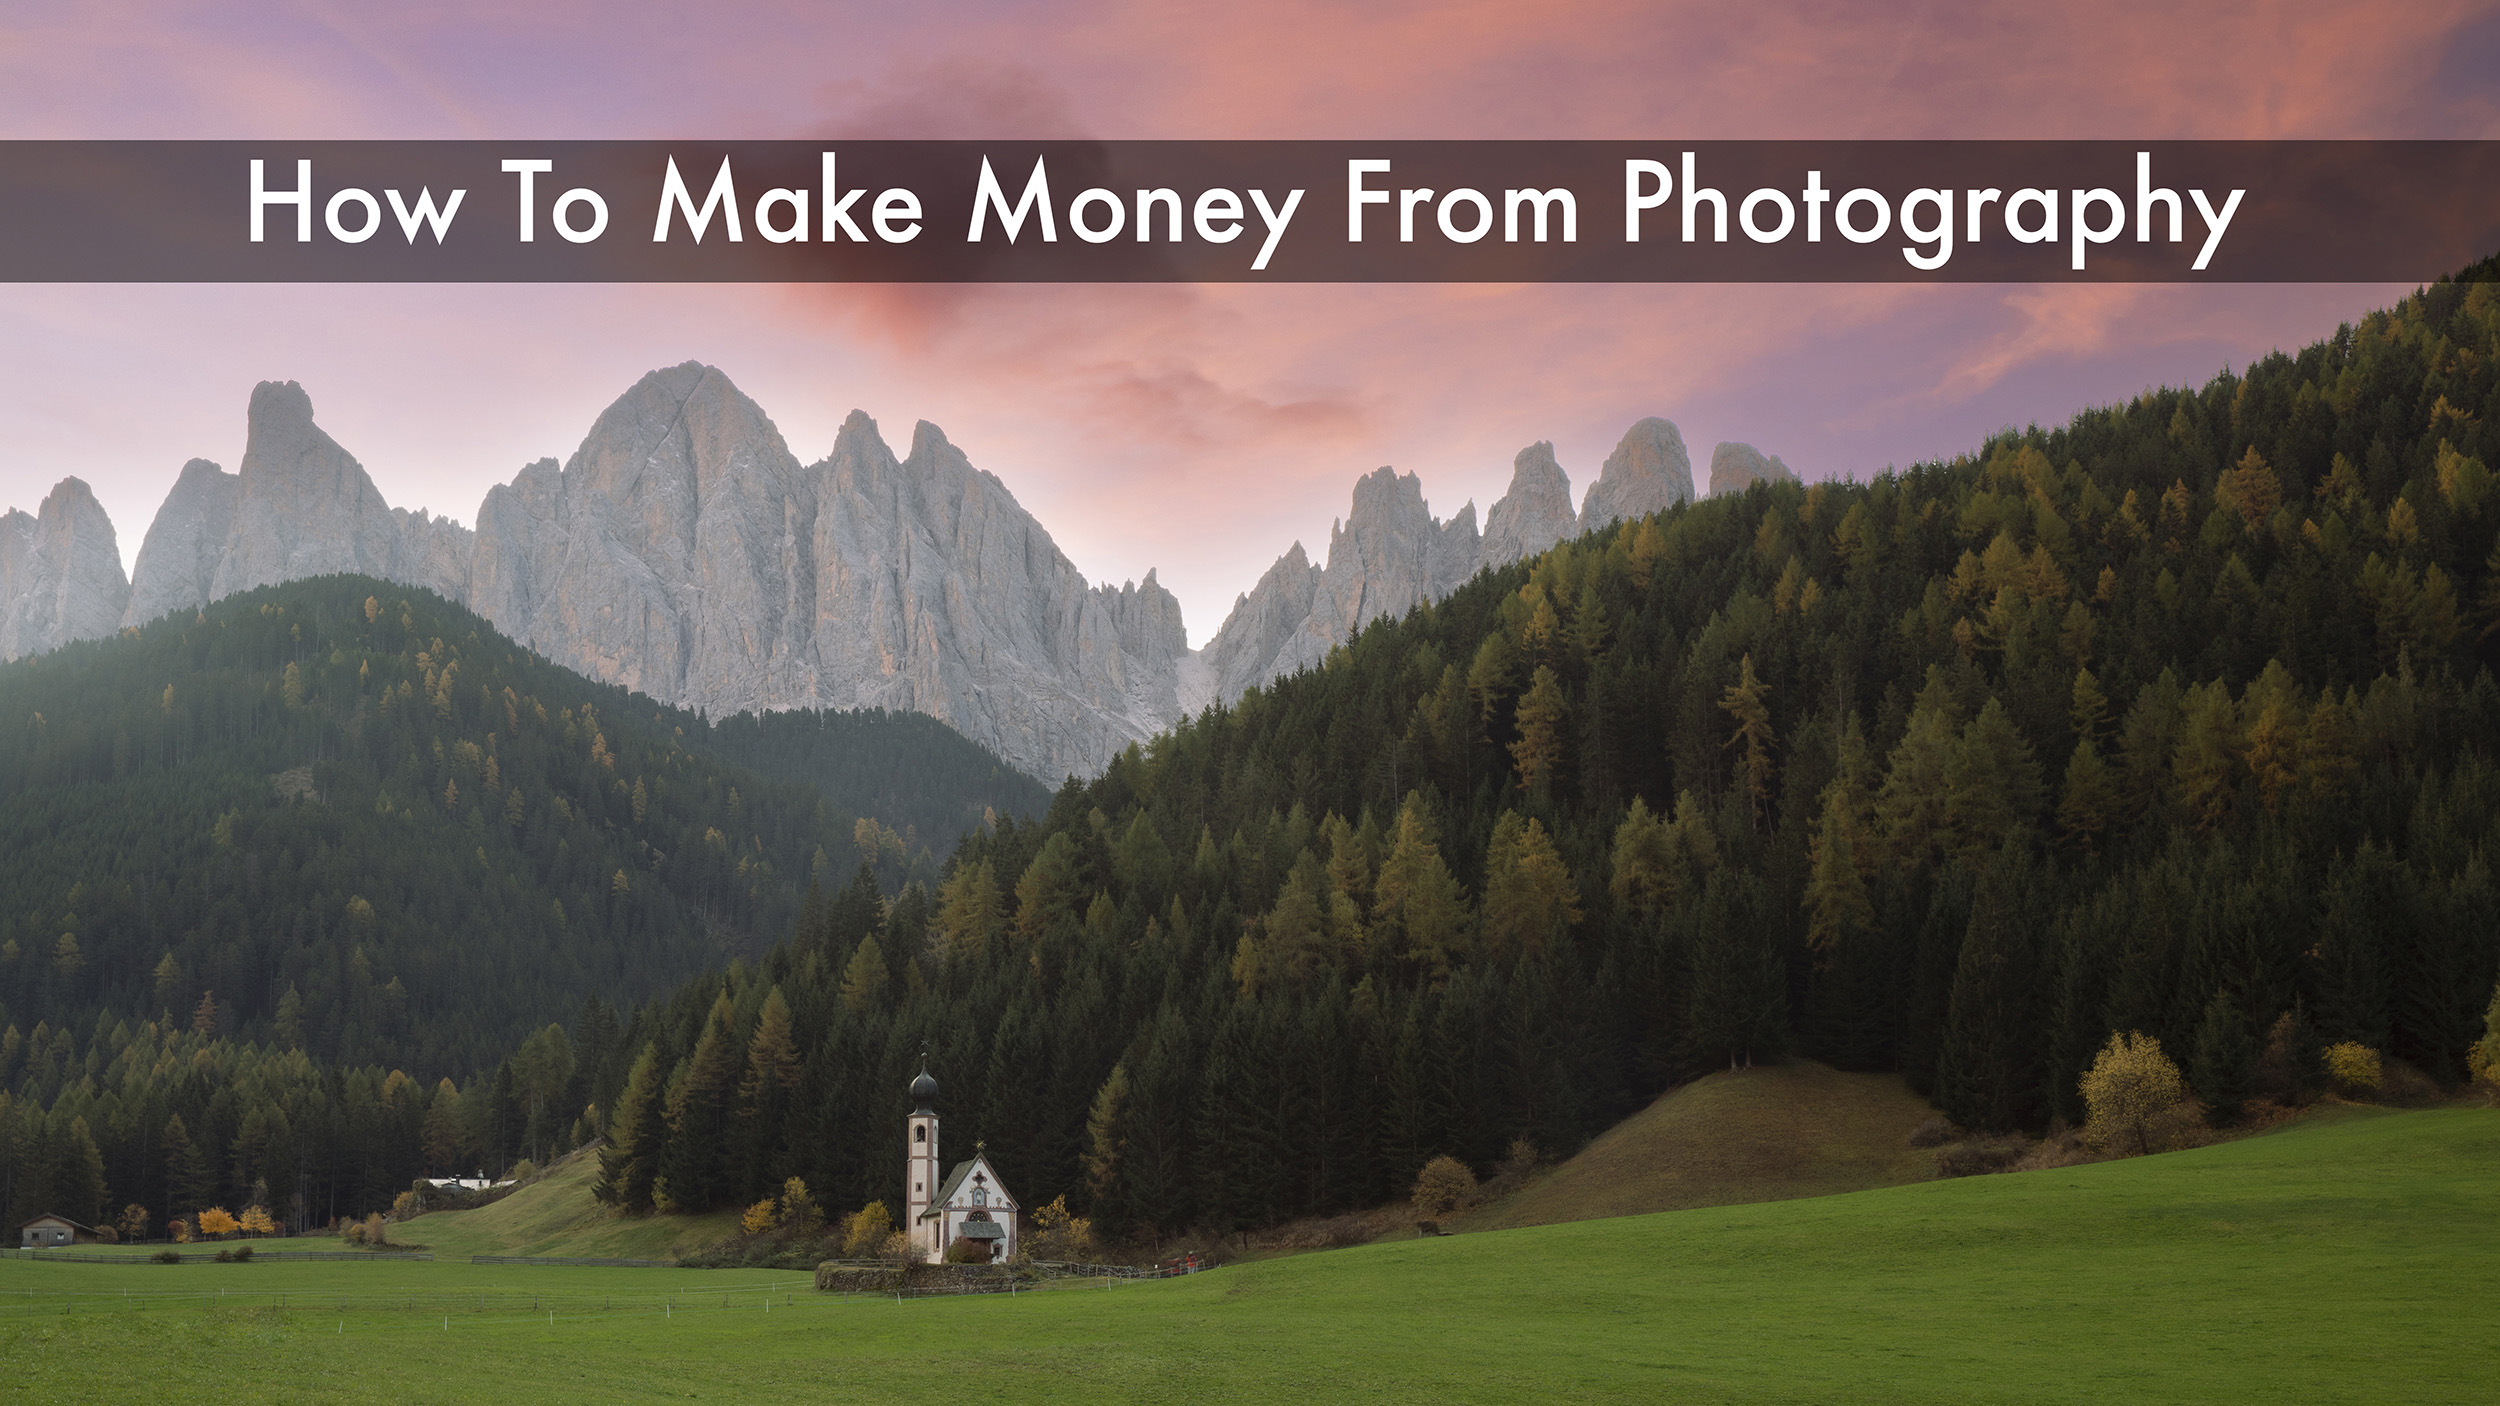 How to make money from photography